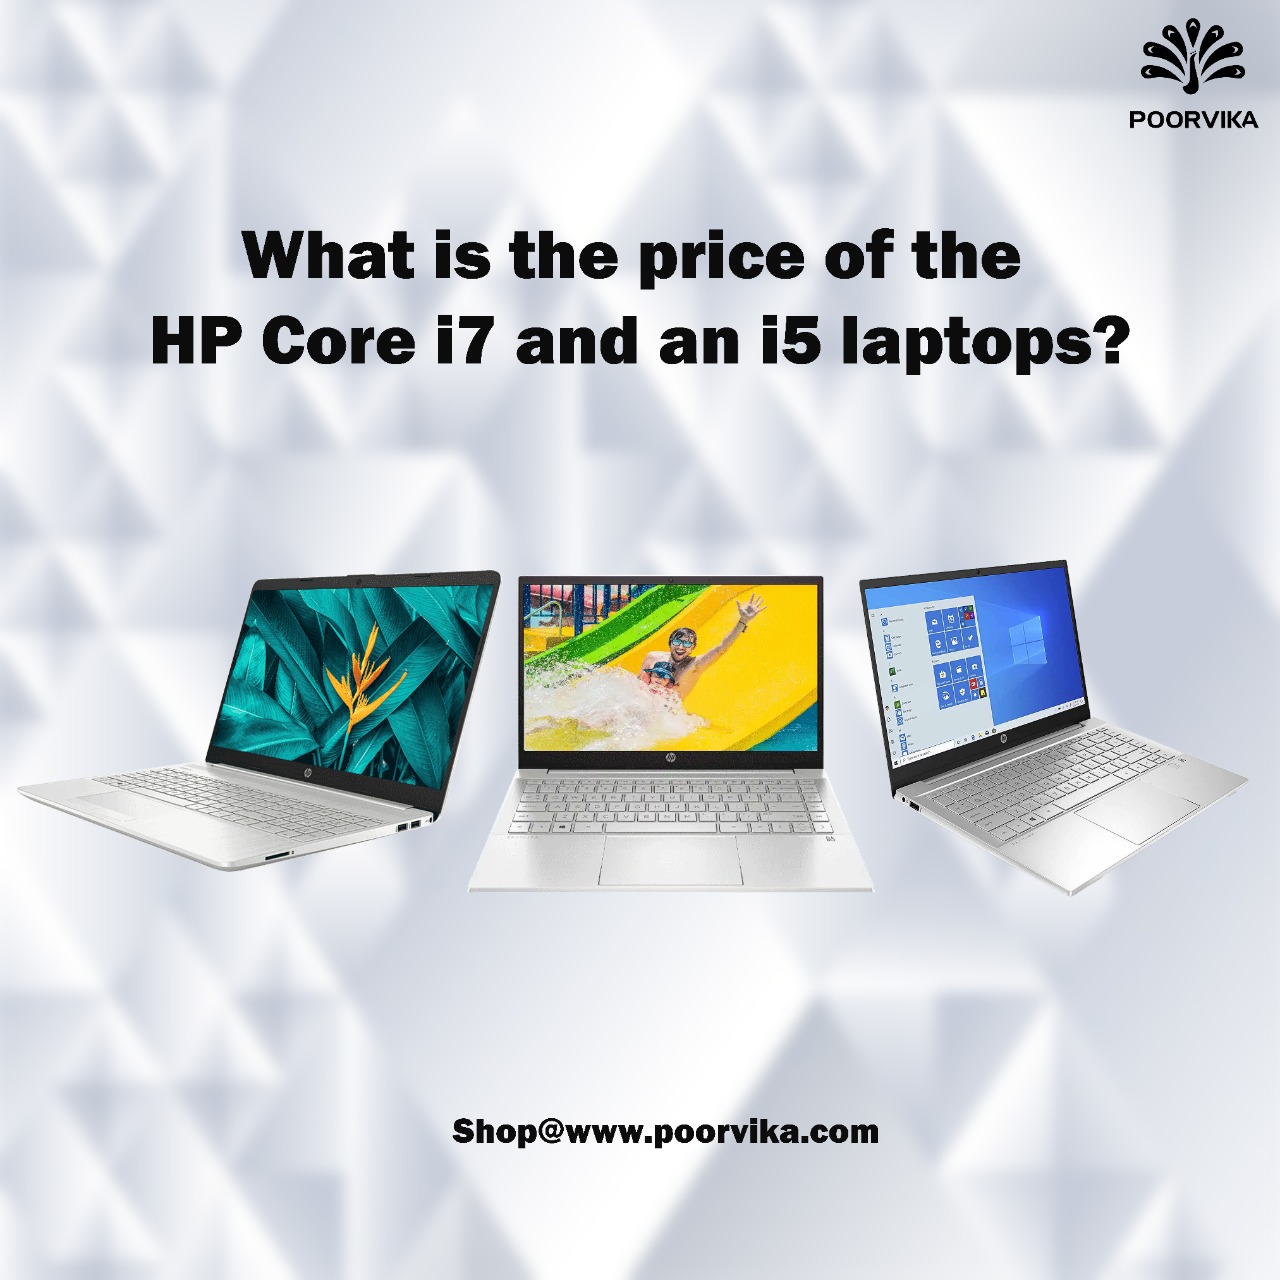 What-is-the-price-of-the-HP-Core-i7-and-an-i5-laptops